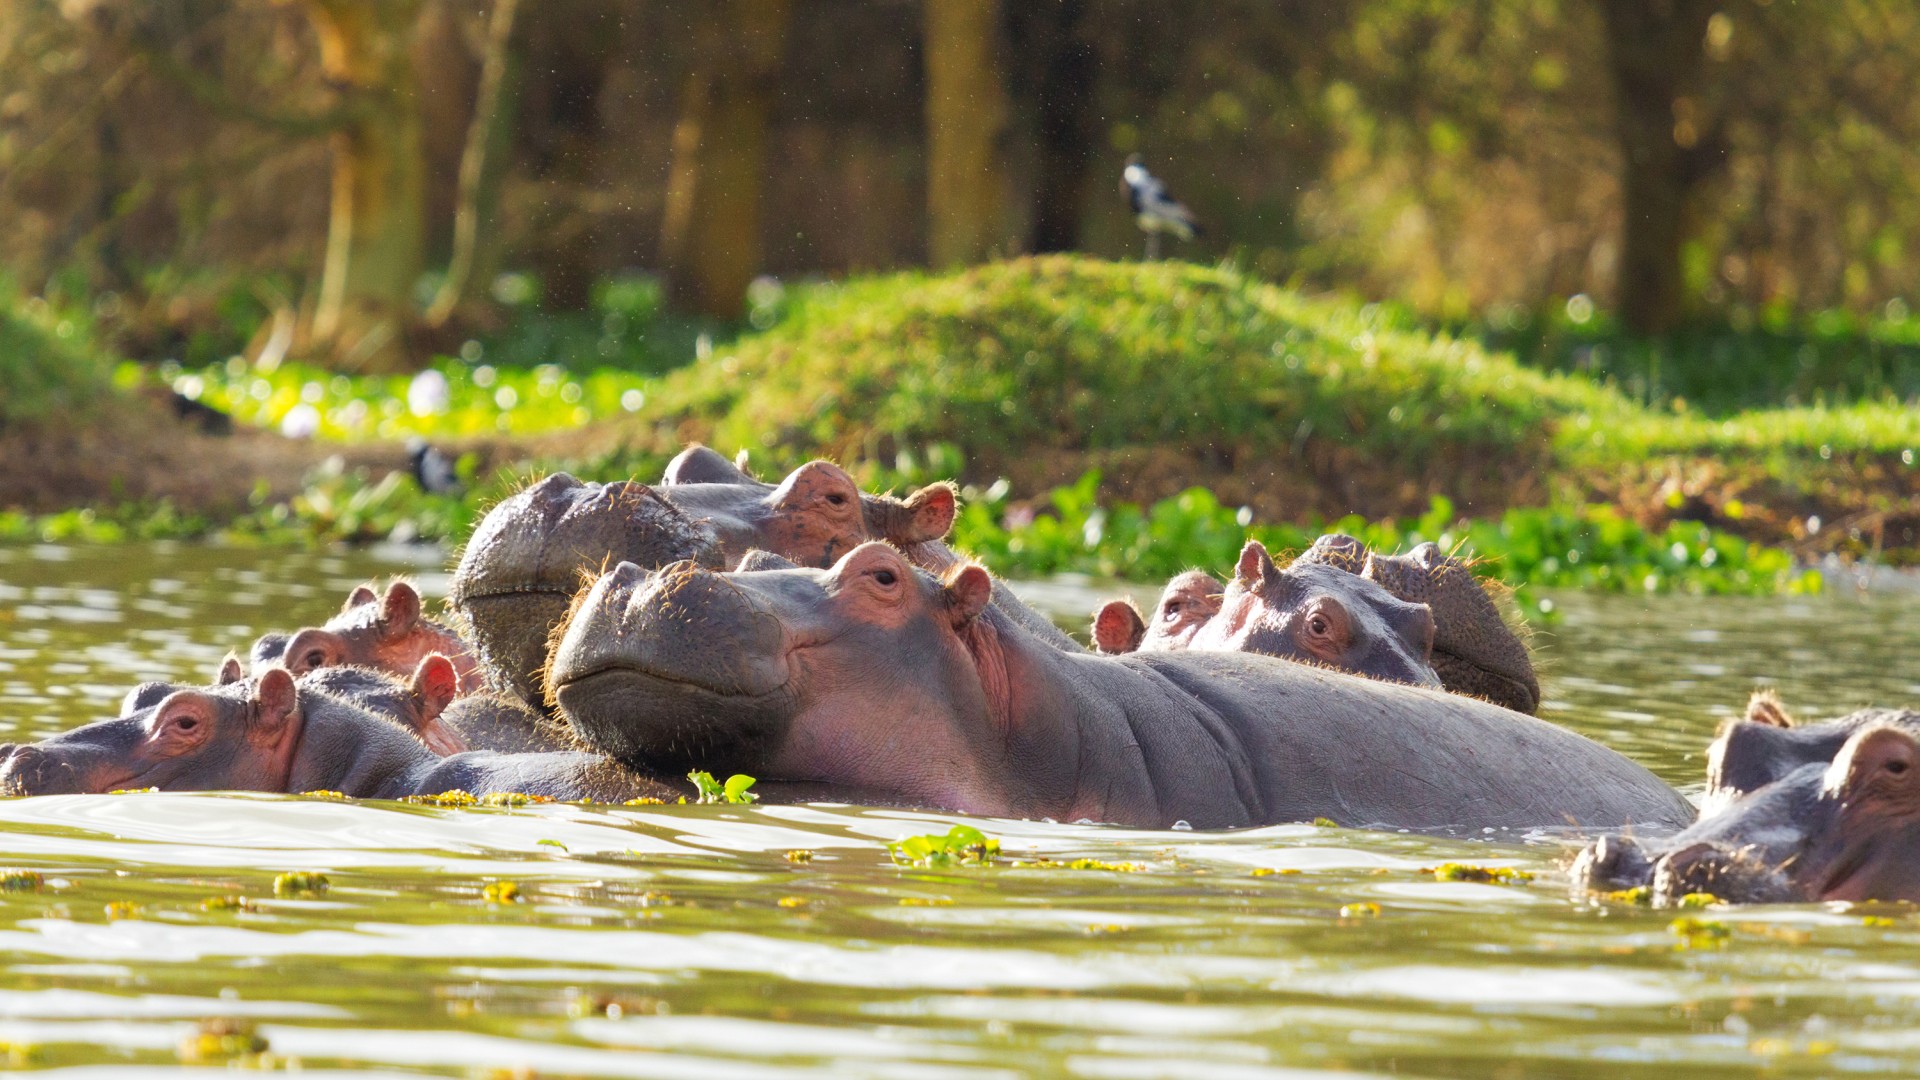 A family of hippos peaking out of a body of water in Kenya